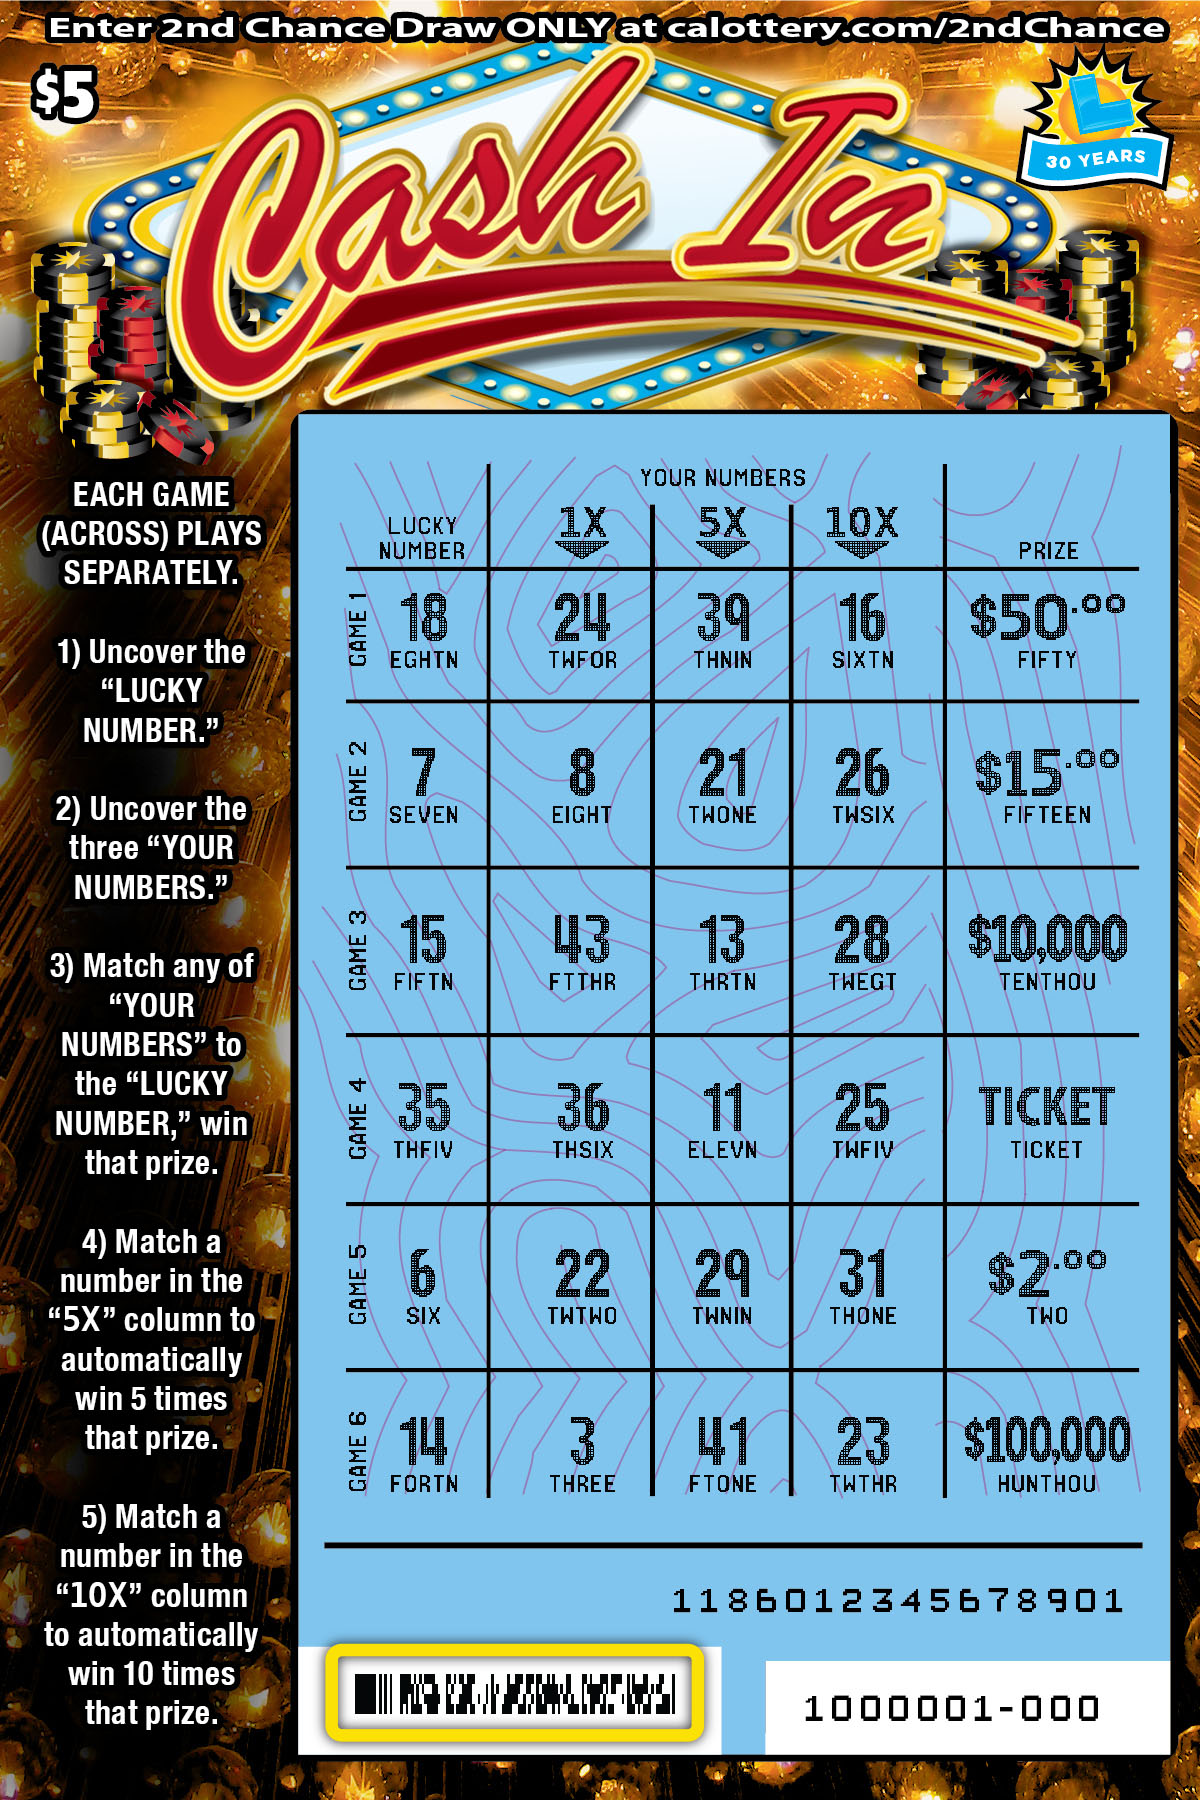 second chance lotto 649